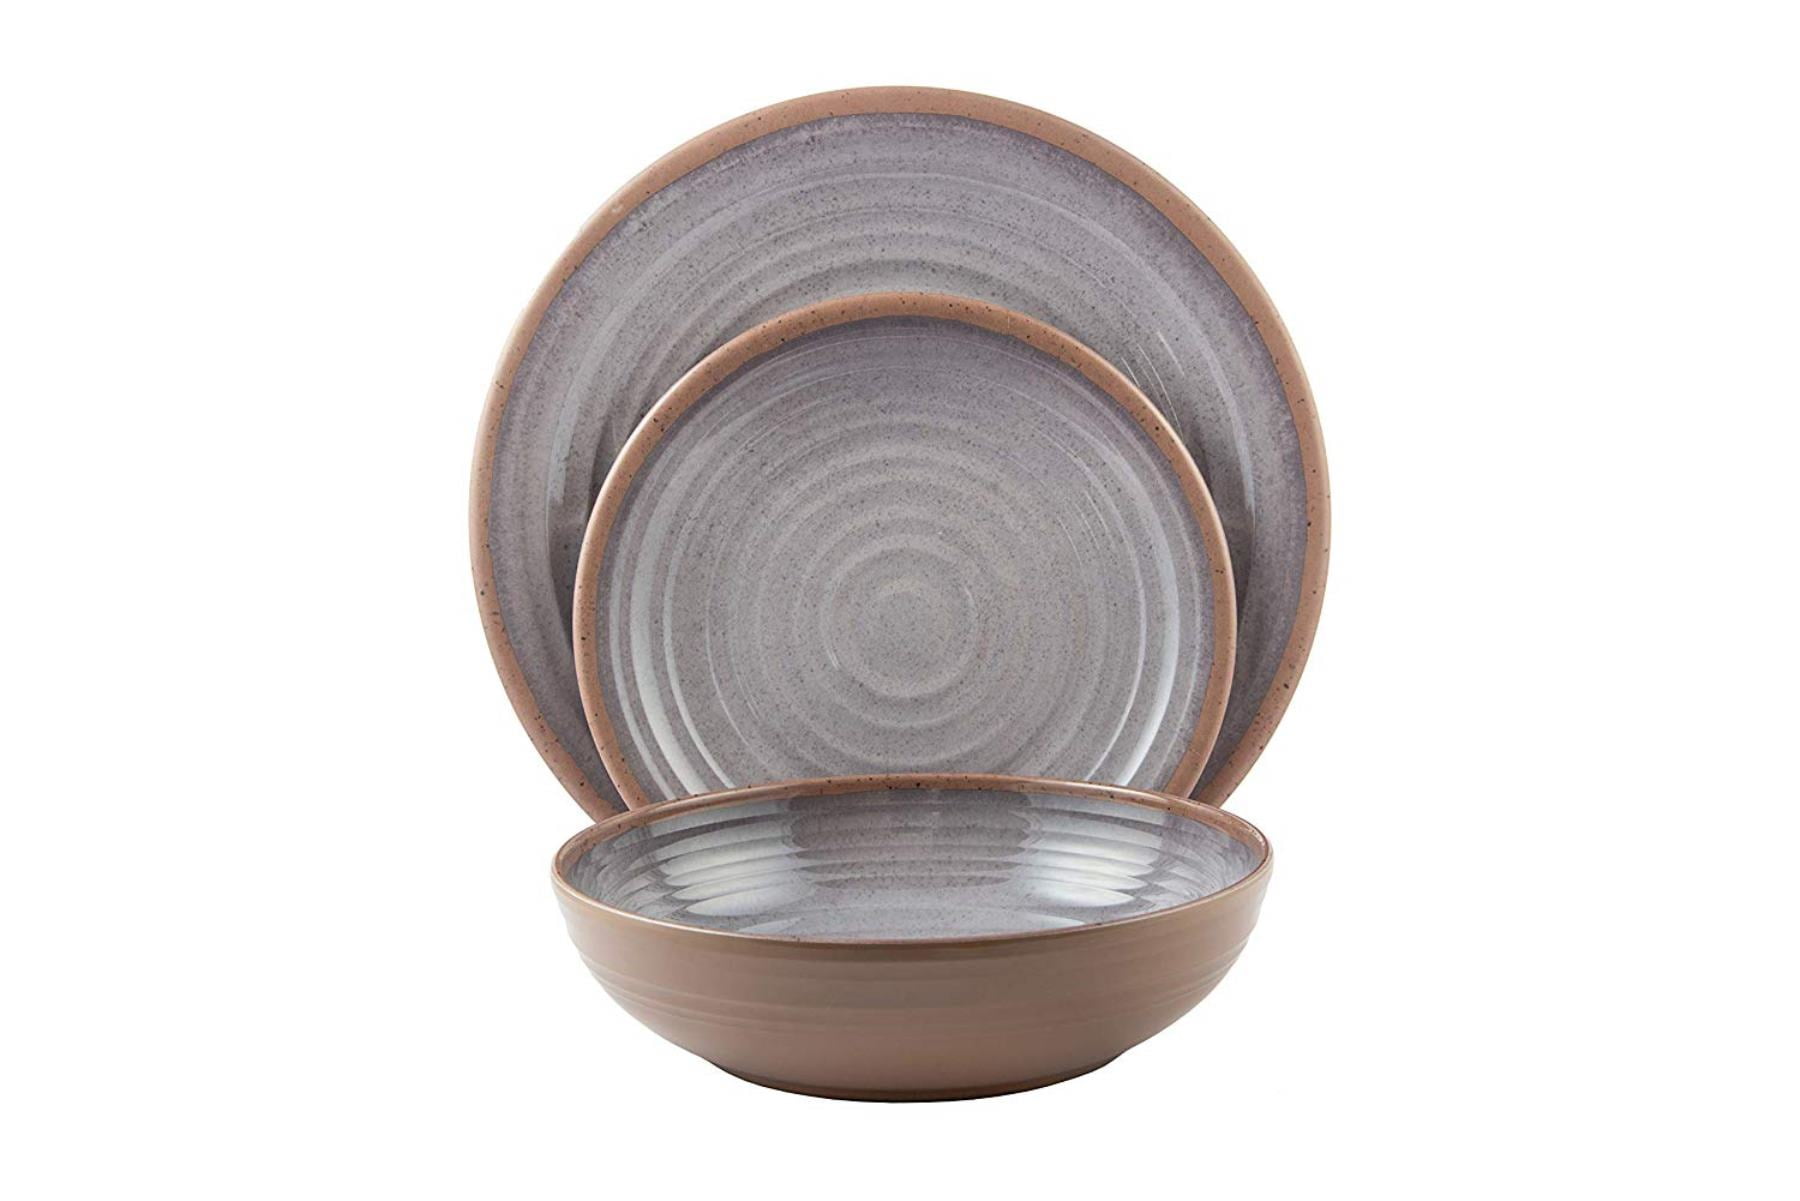 Dinner Plate Clay Collection | Shatter-Proof and Chip-Resistant Melamine Plates and Bowls Color: Multicolor 4 Each Melange 12-Piece 100% Melamine Dinnerware Set Salad Plate & Soup Bowl 